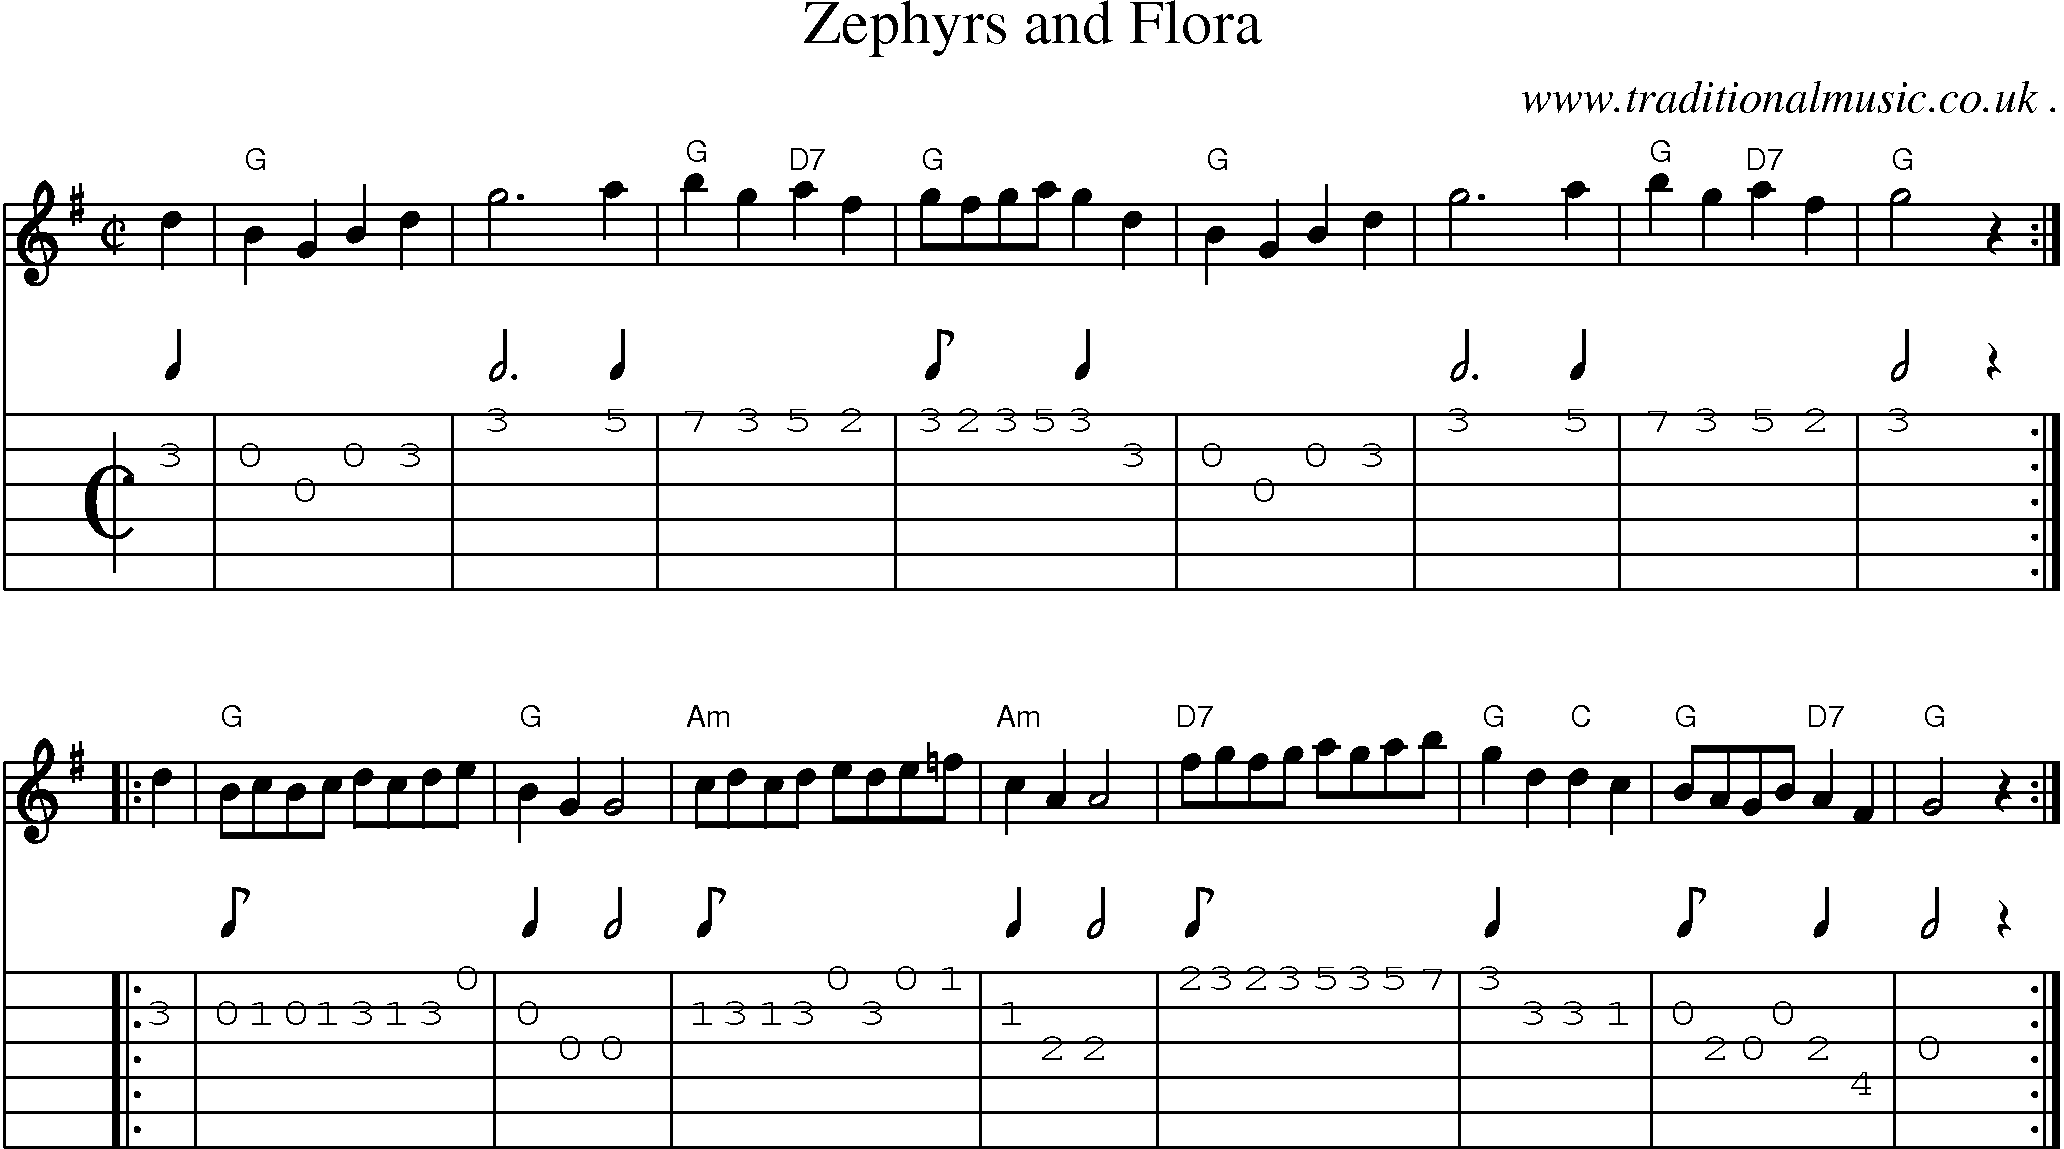 Sheet-music  score, Chords and Guitar Tabs for Zephyrs And Flora